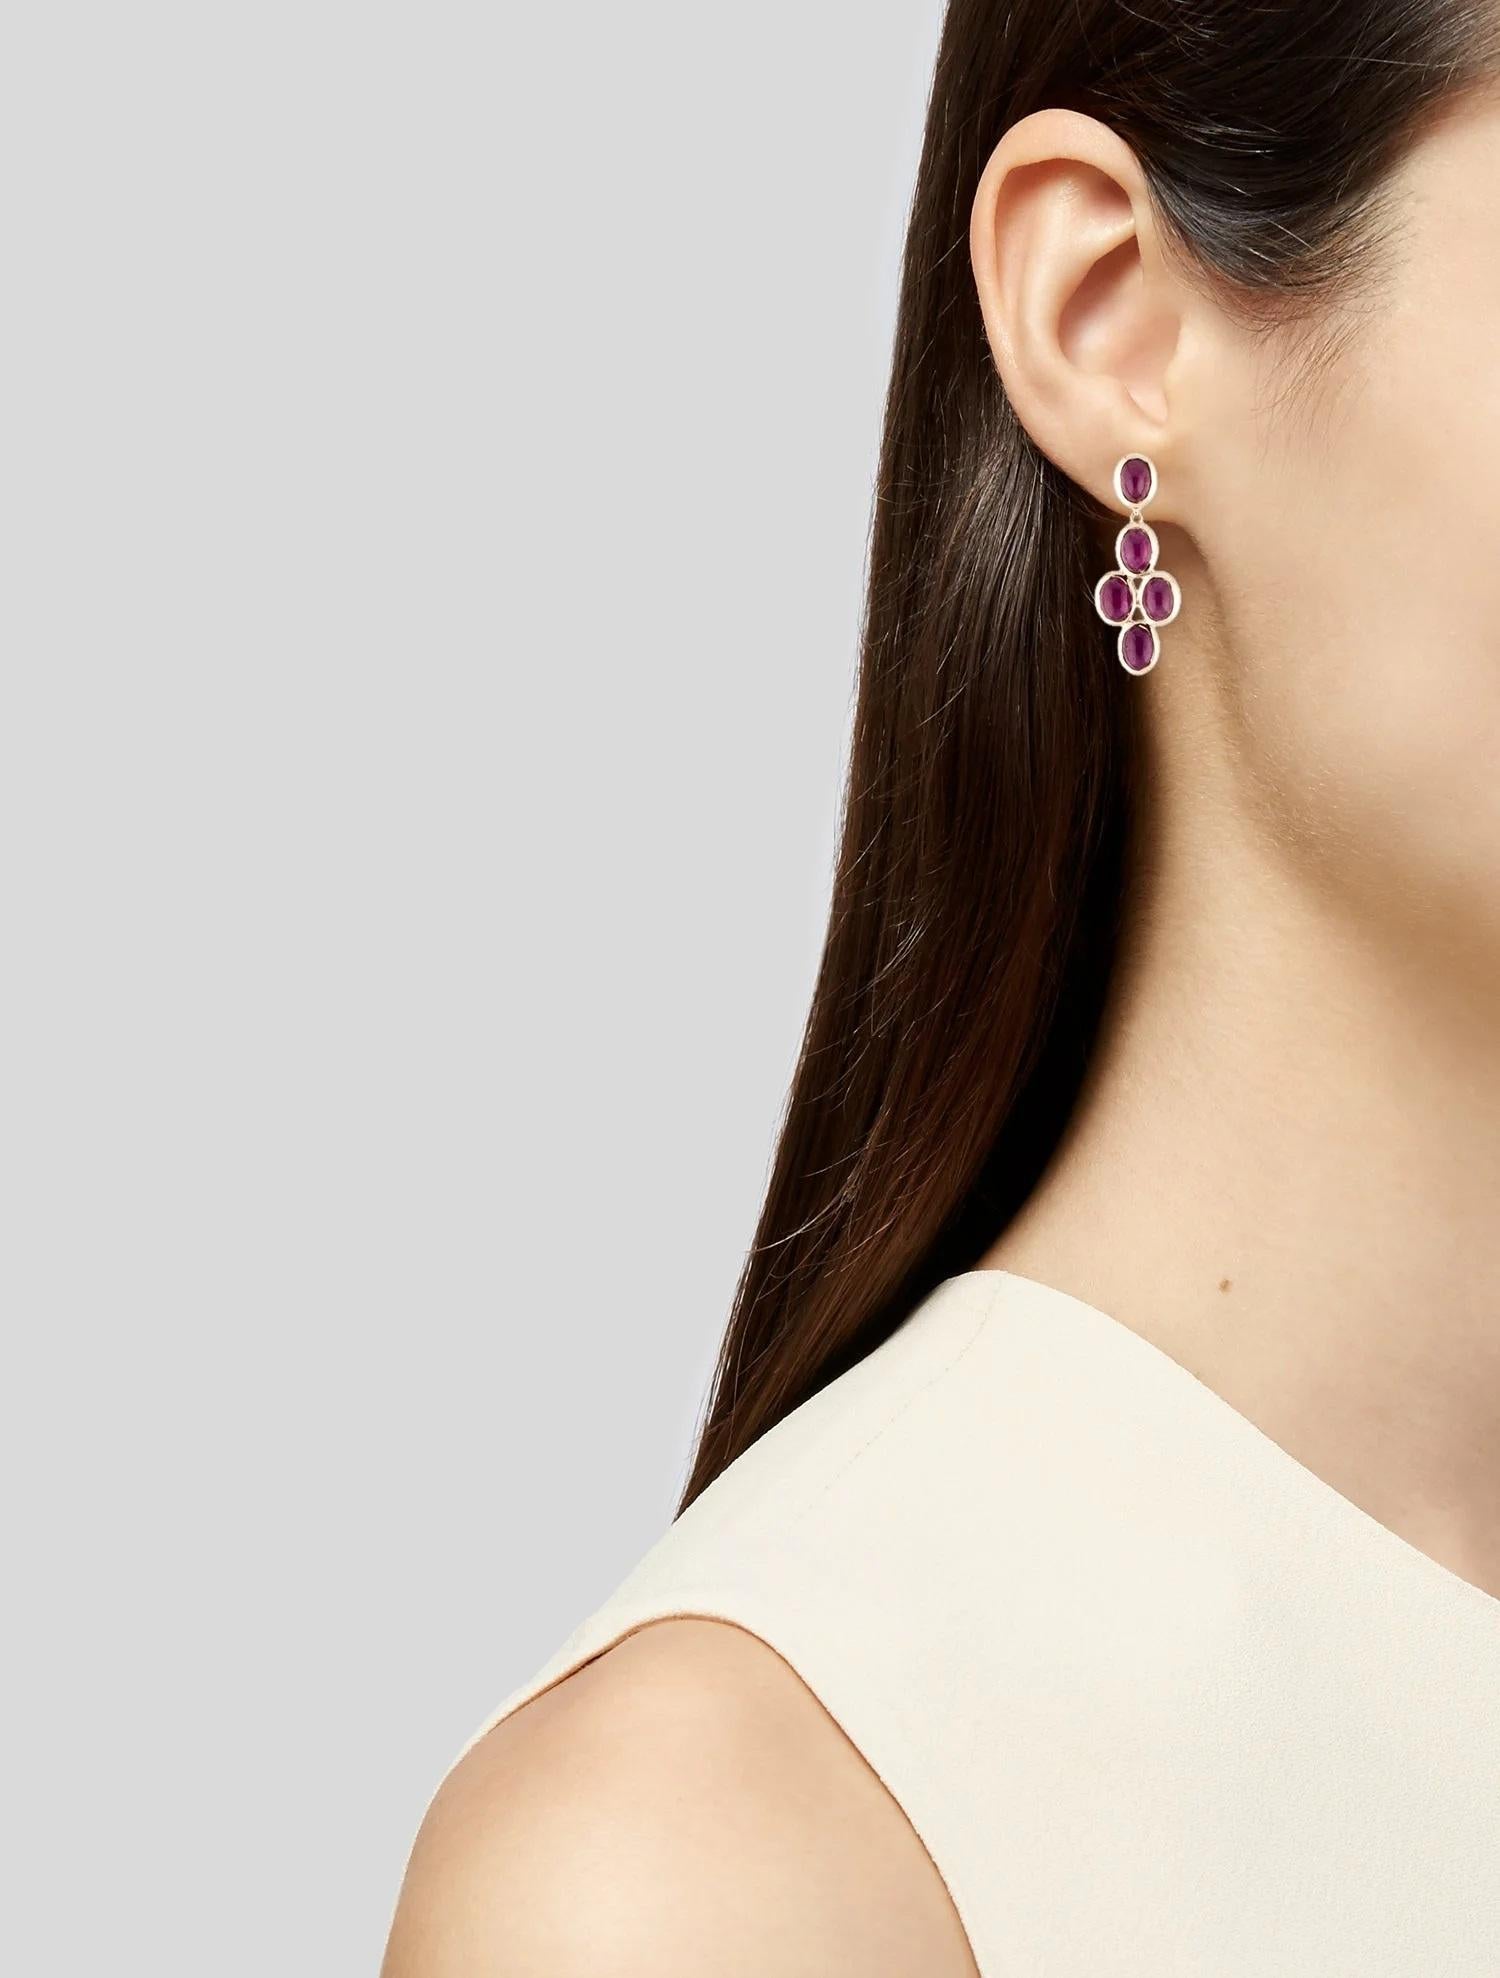 Elevate your look with these exquisite 14K yellow gold drop earrings featuring stunning oval ruby cabochons. The focal point of these earrings is the remarkable 12.03 carat ruby stones, each showcasing a rich red hue. The elegant design and vibrant